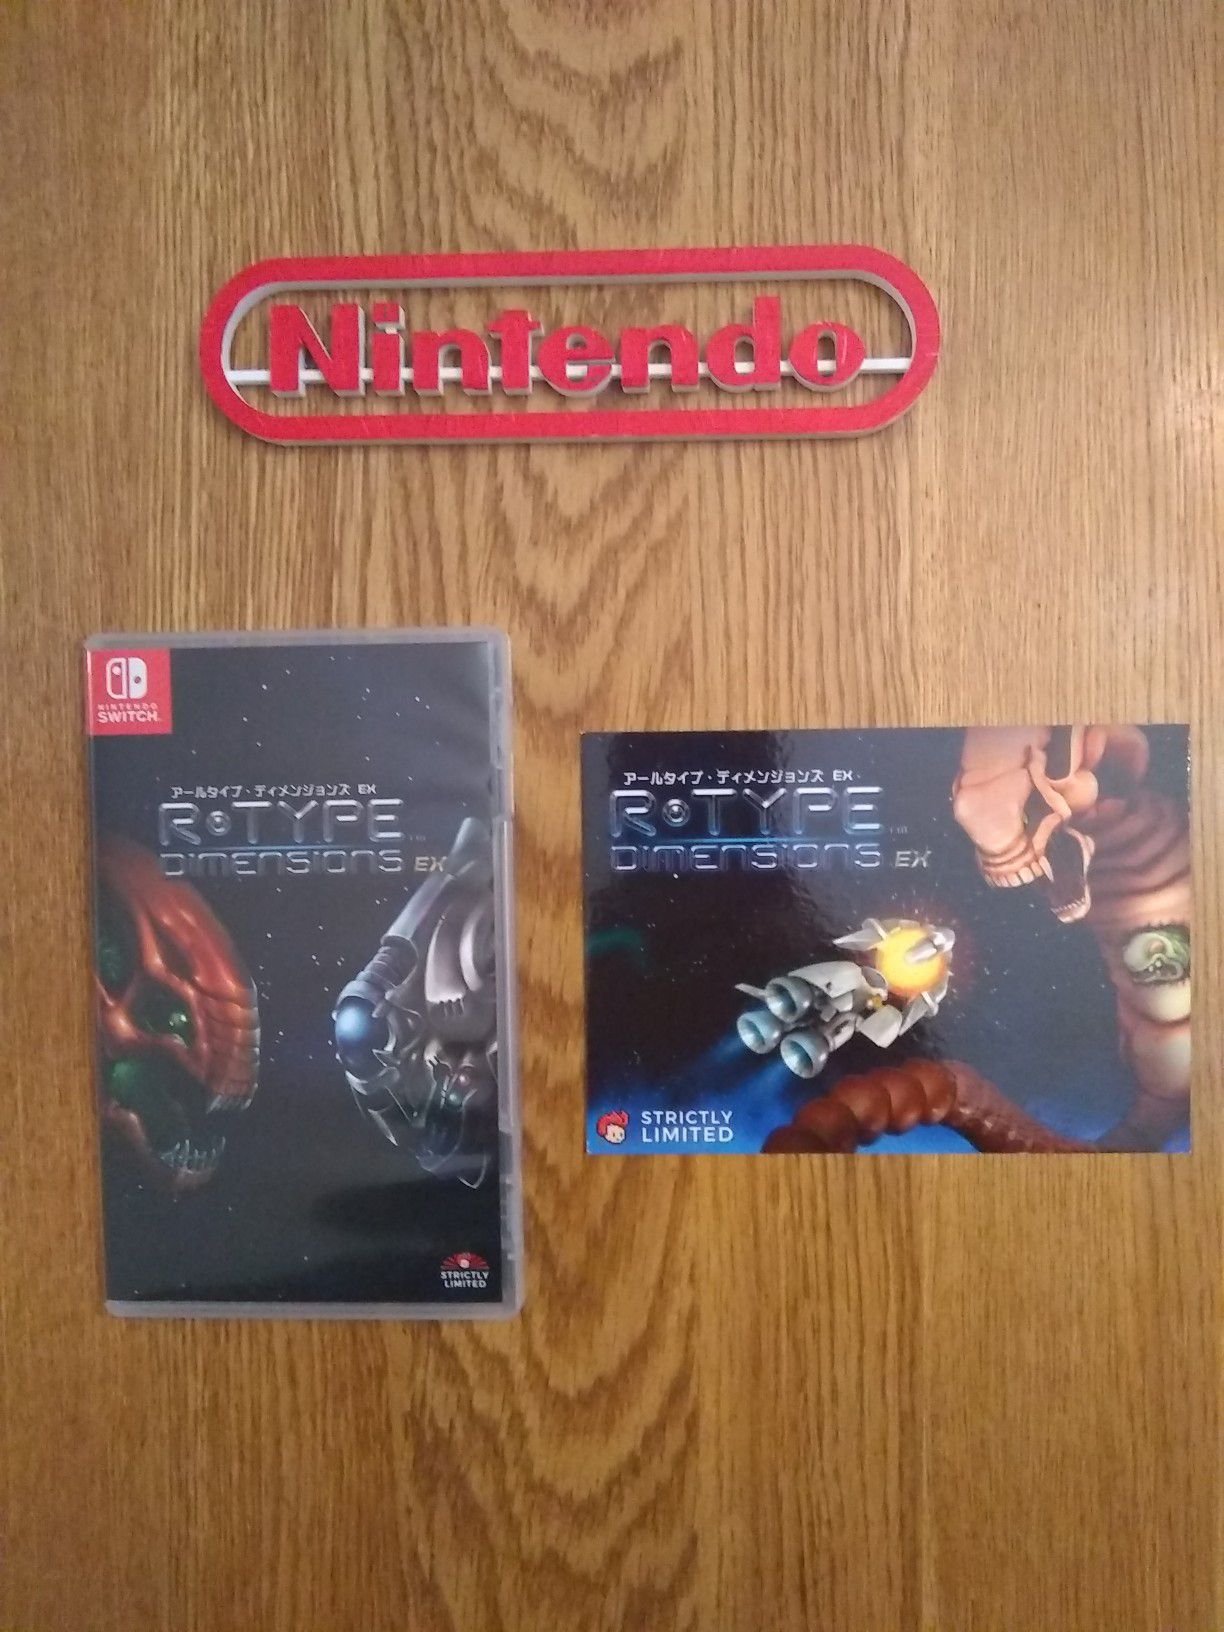 STRICTLY LIMITED R-TYPE DIMENSIONS EX EMPTY CASE NO GAME!